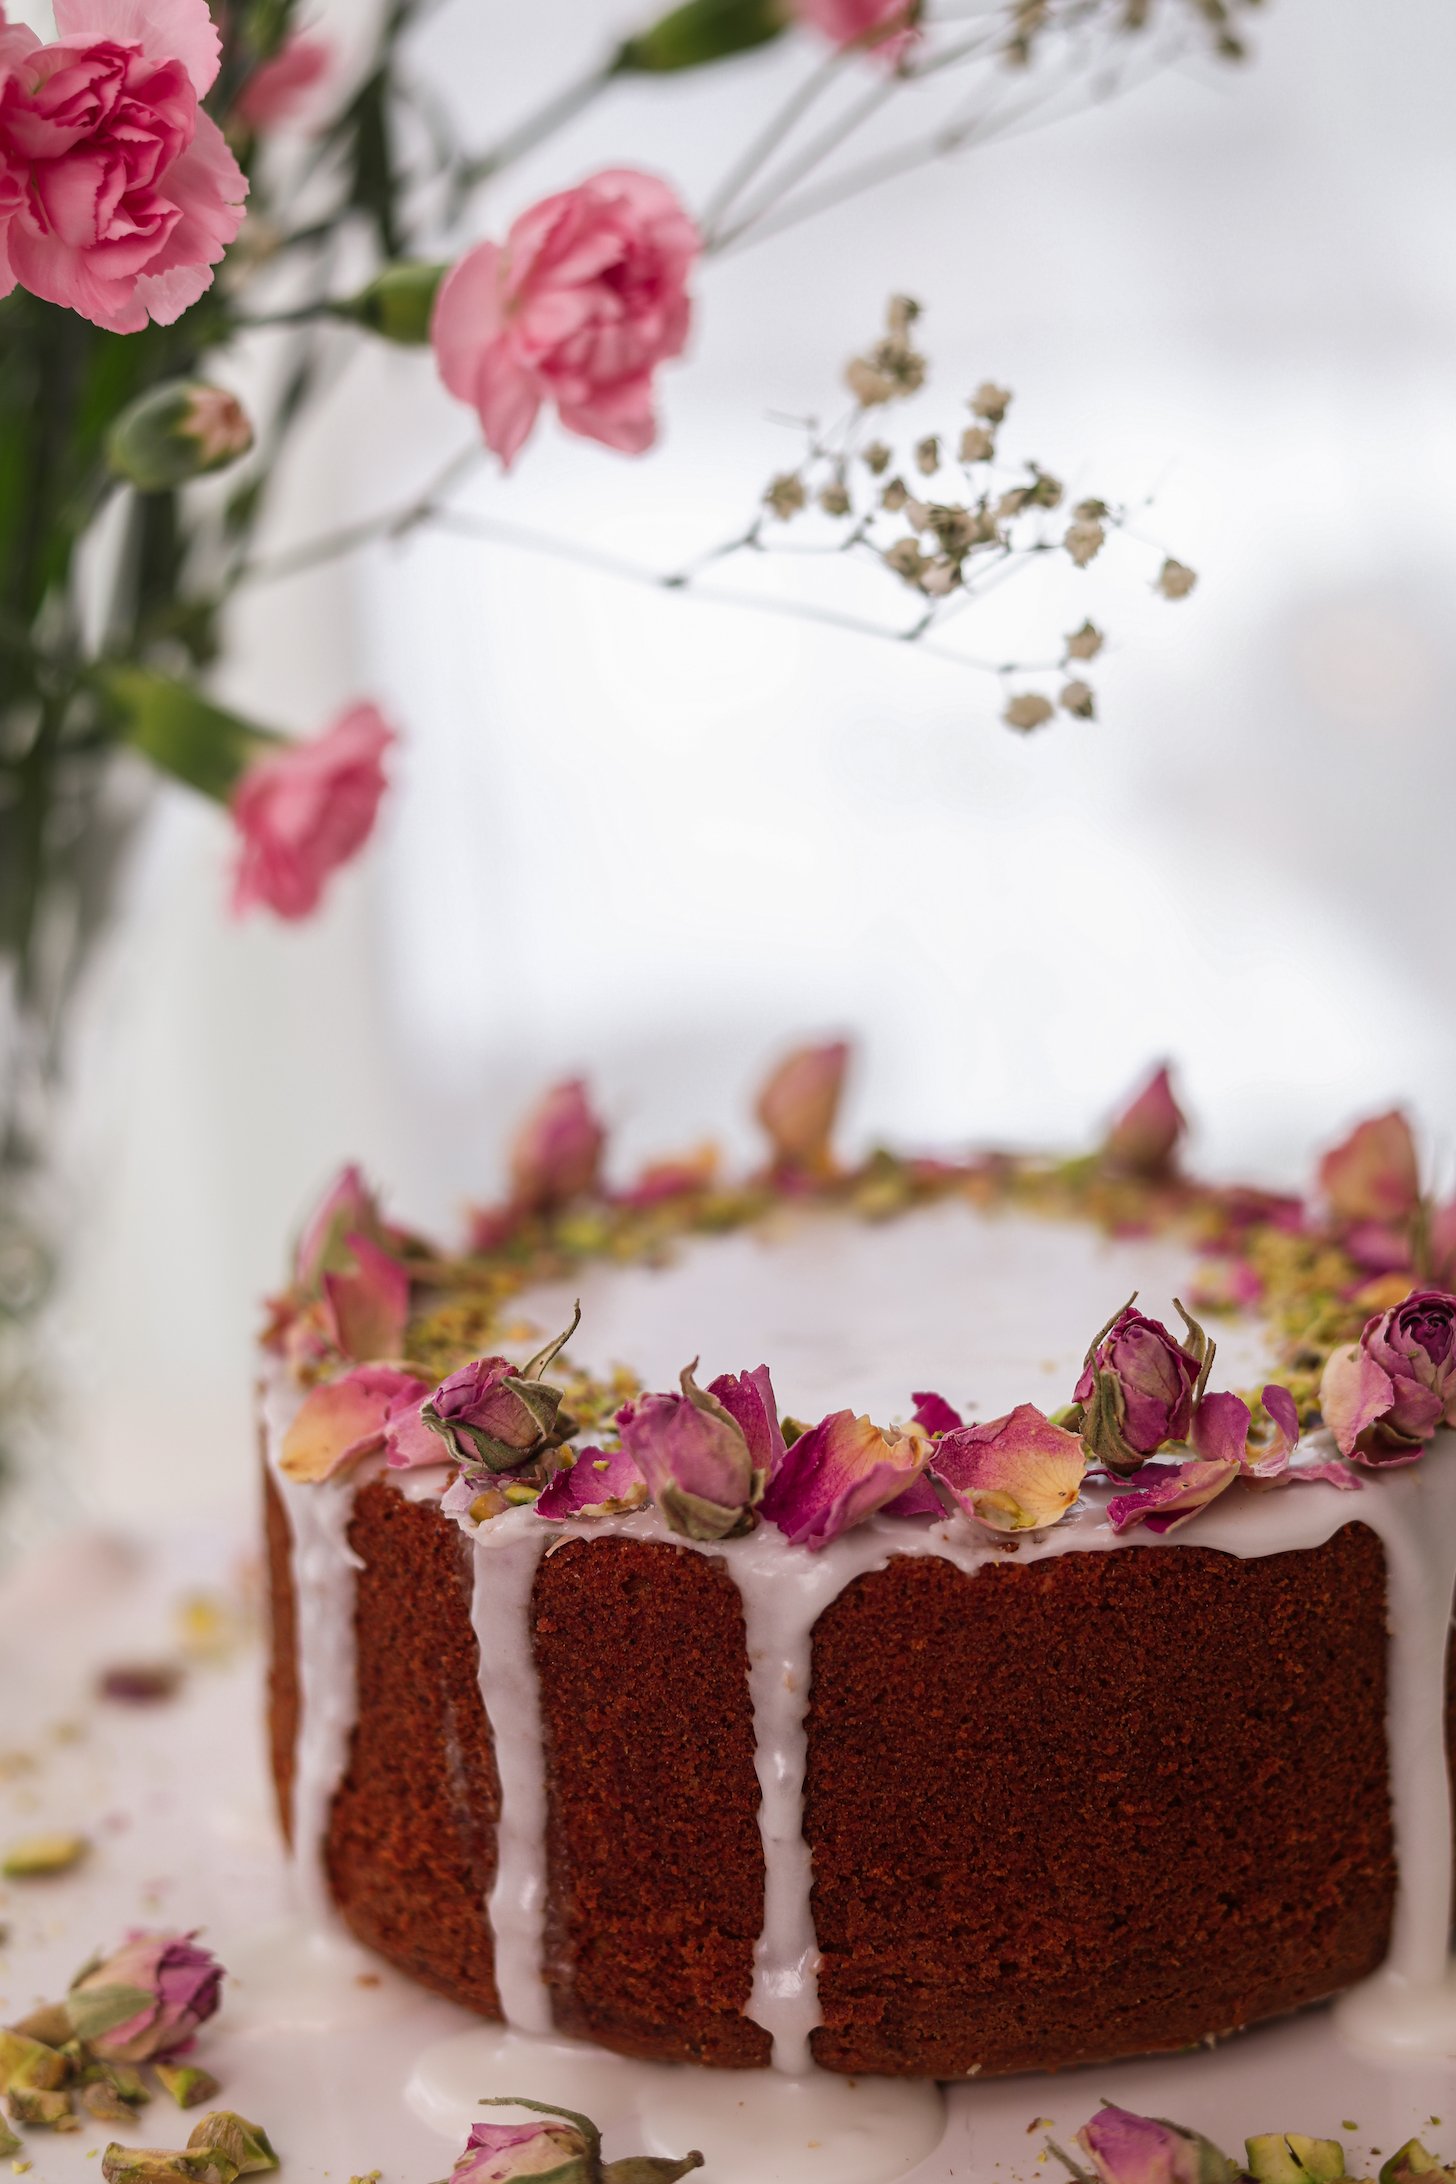 A perspective image of a cake with dripping white icing, dried roses, and crushed pistachios on top. Pink flowers lean over the cake.